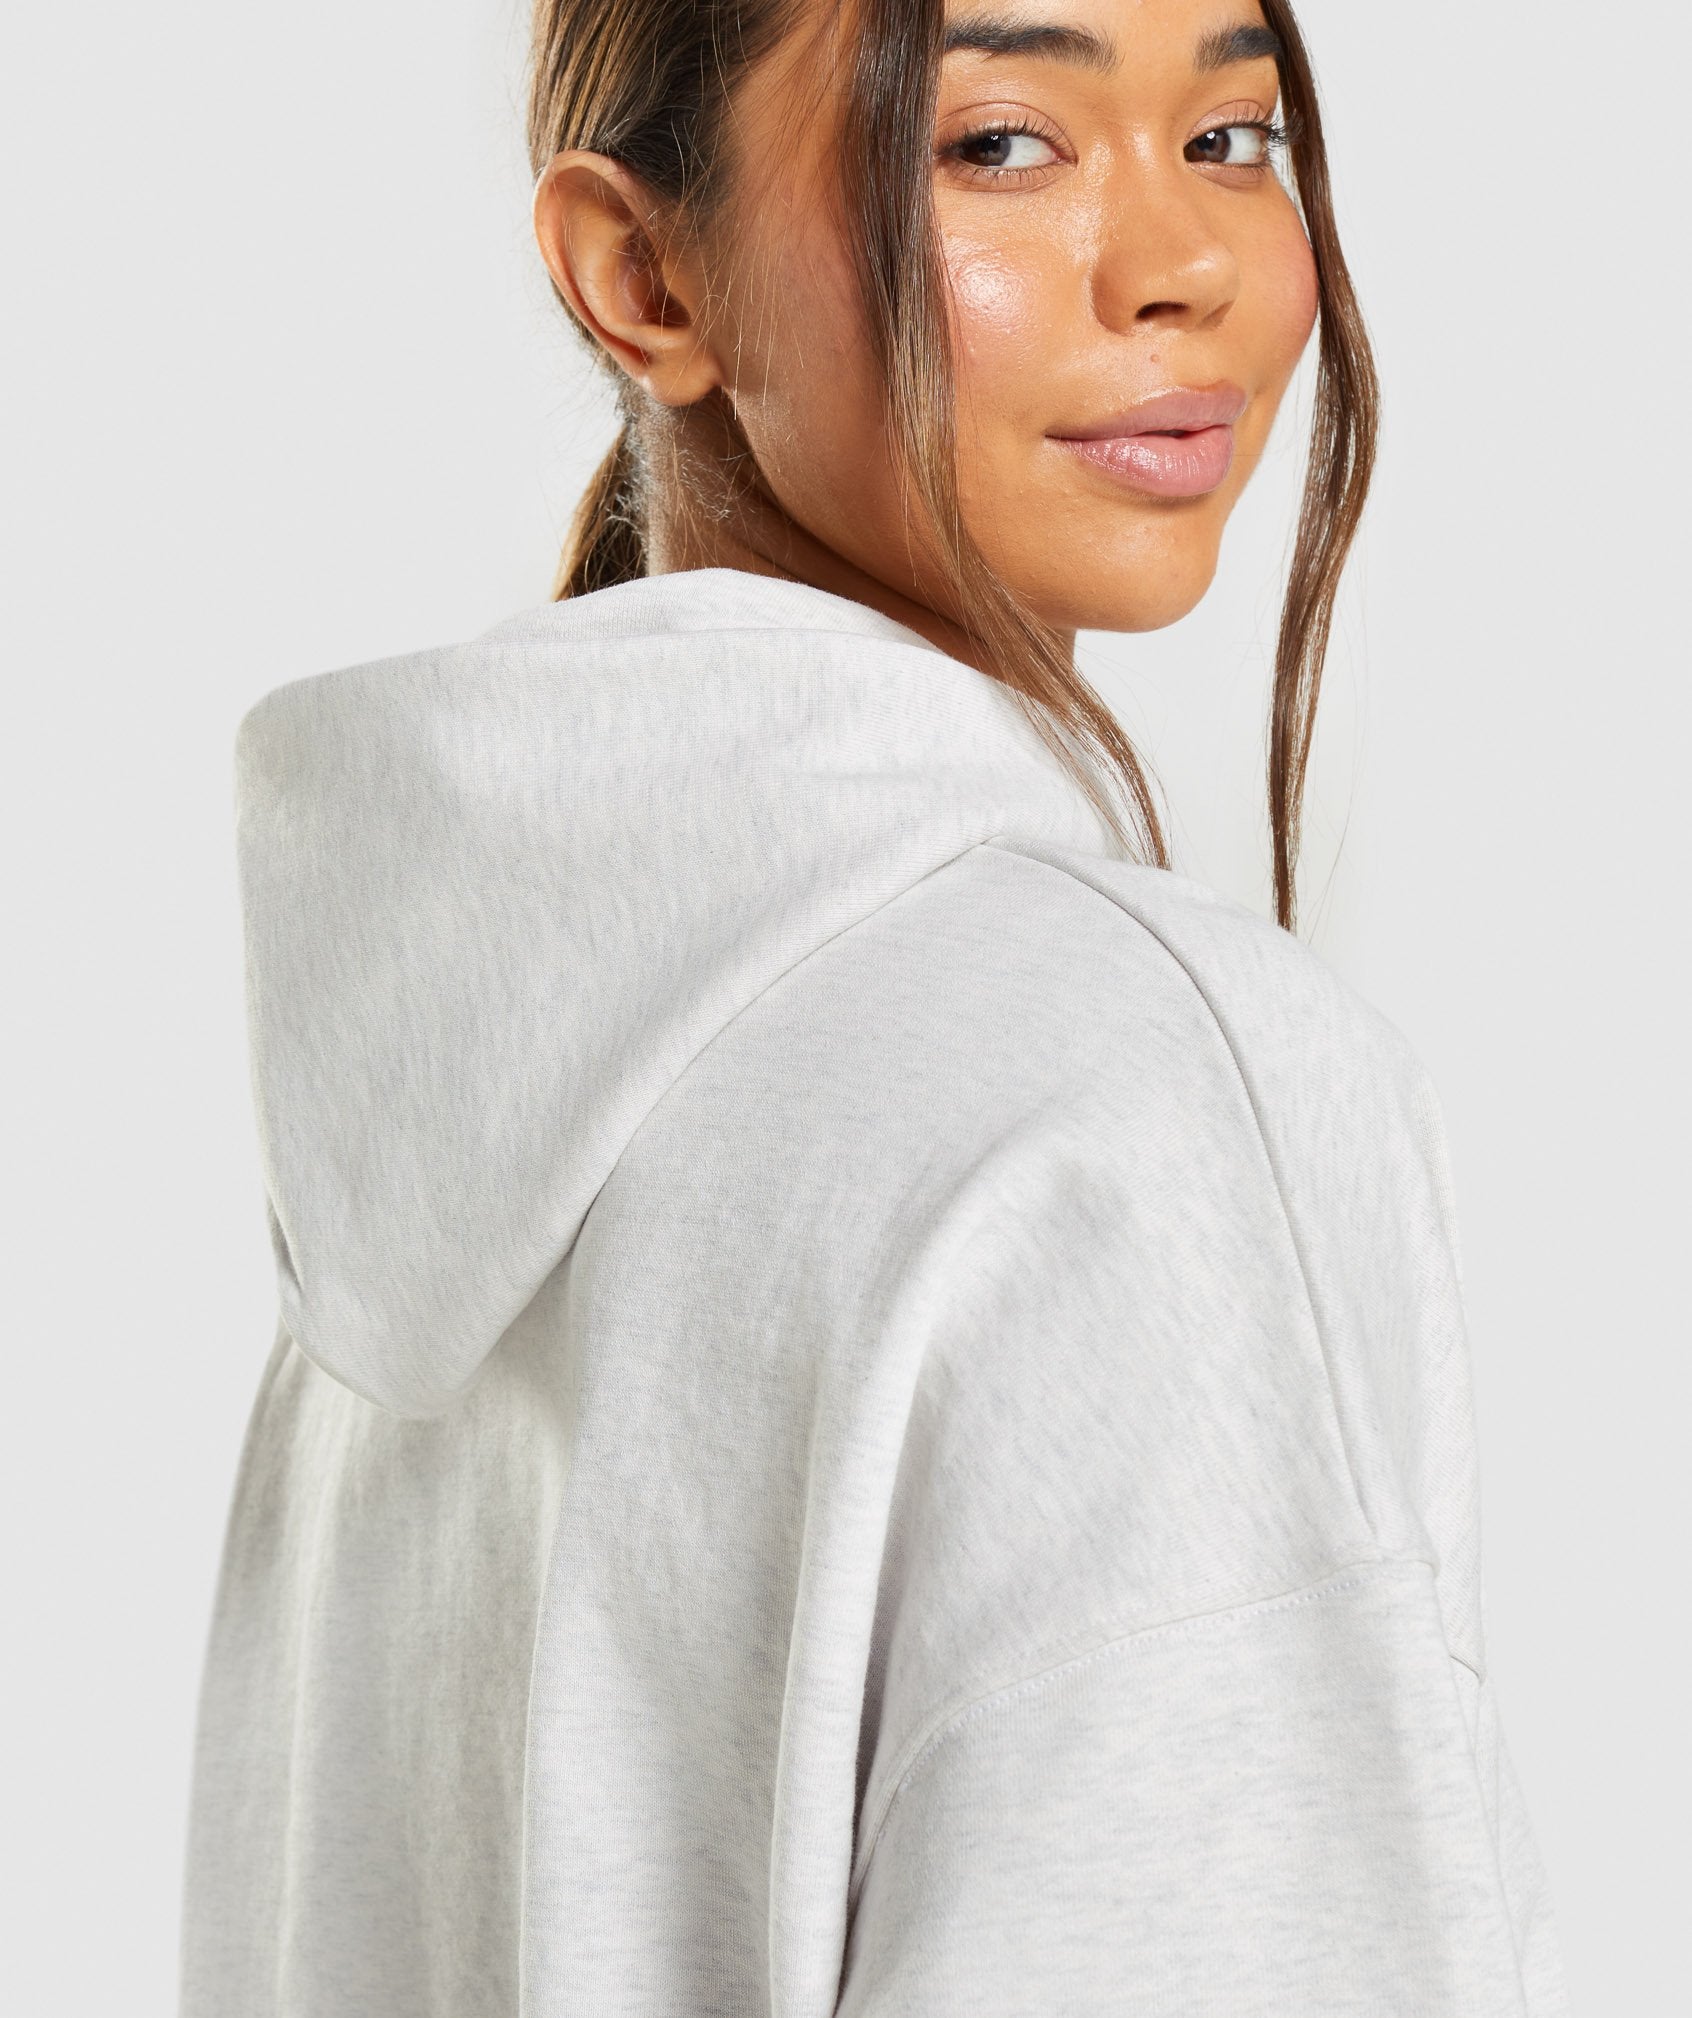 Rest Day Sweats Hoodie in White Marl - view 5